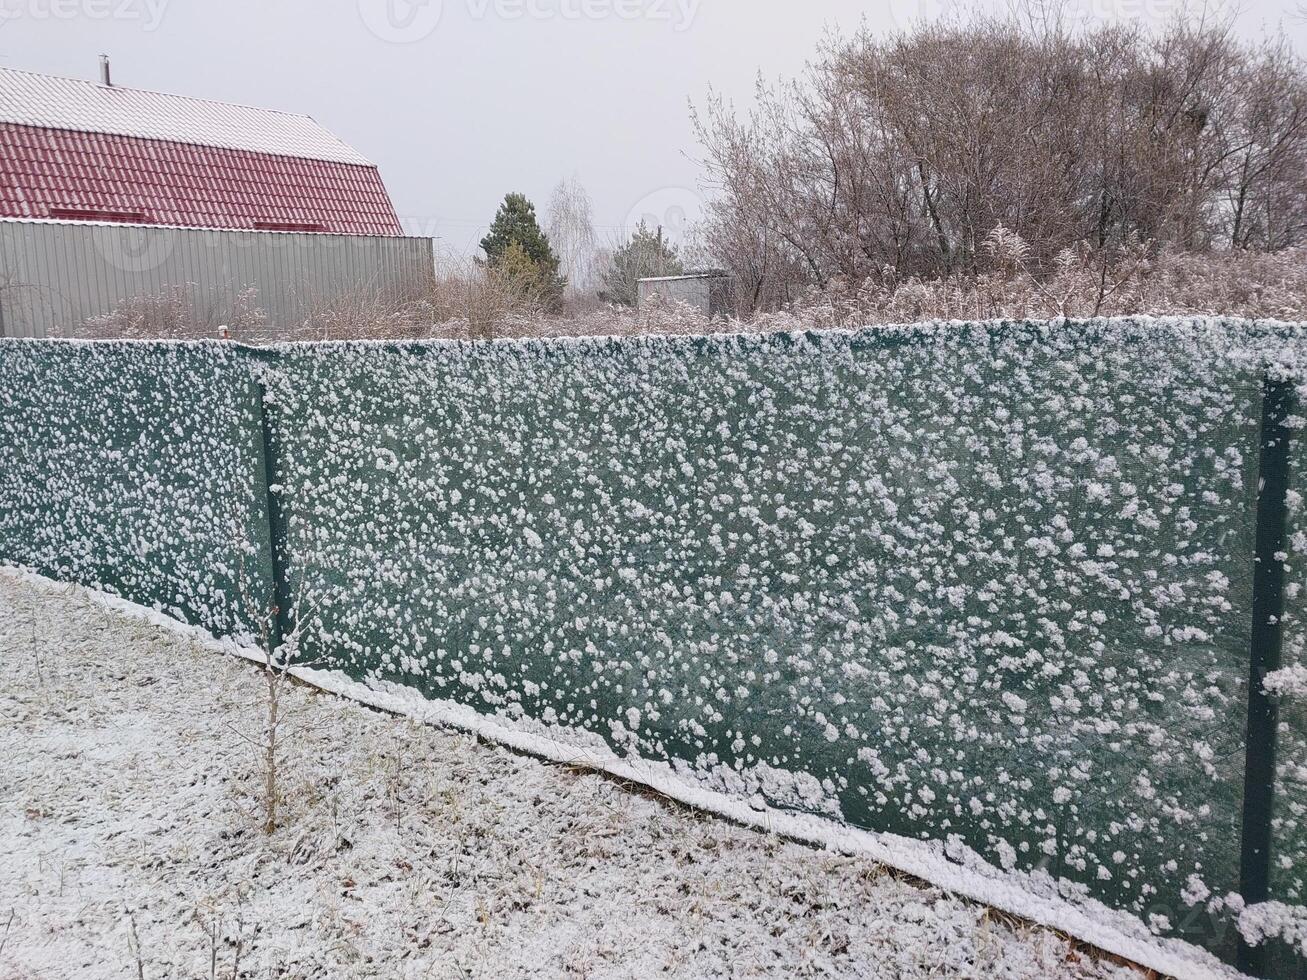 Snow fell on the fence in the village photo